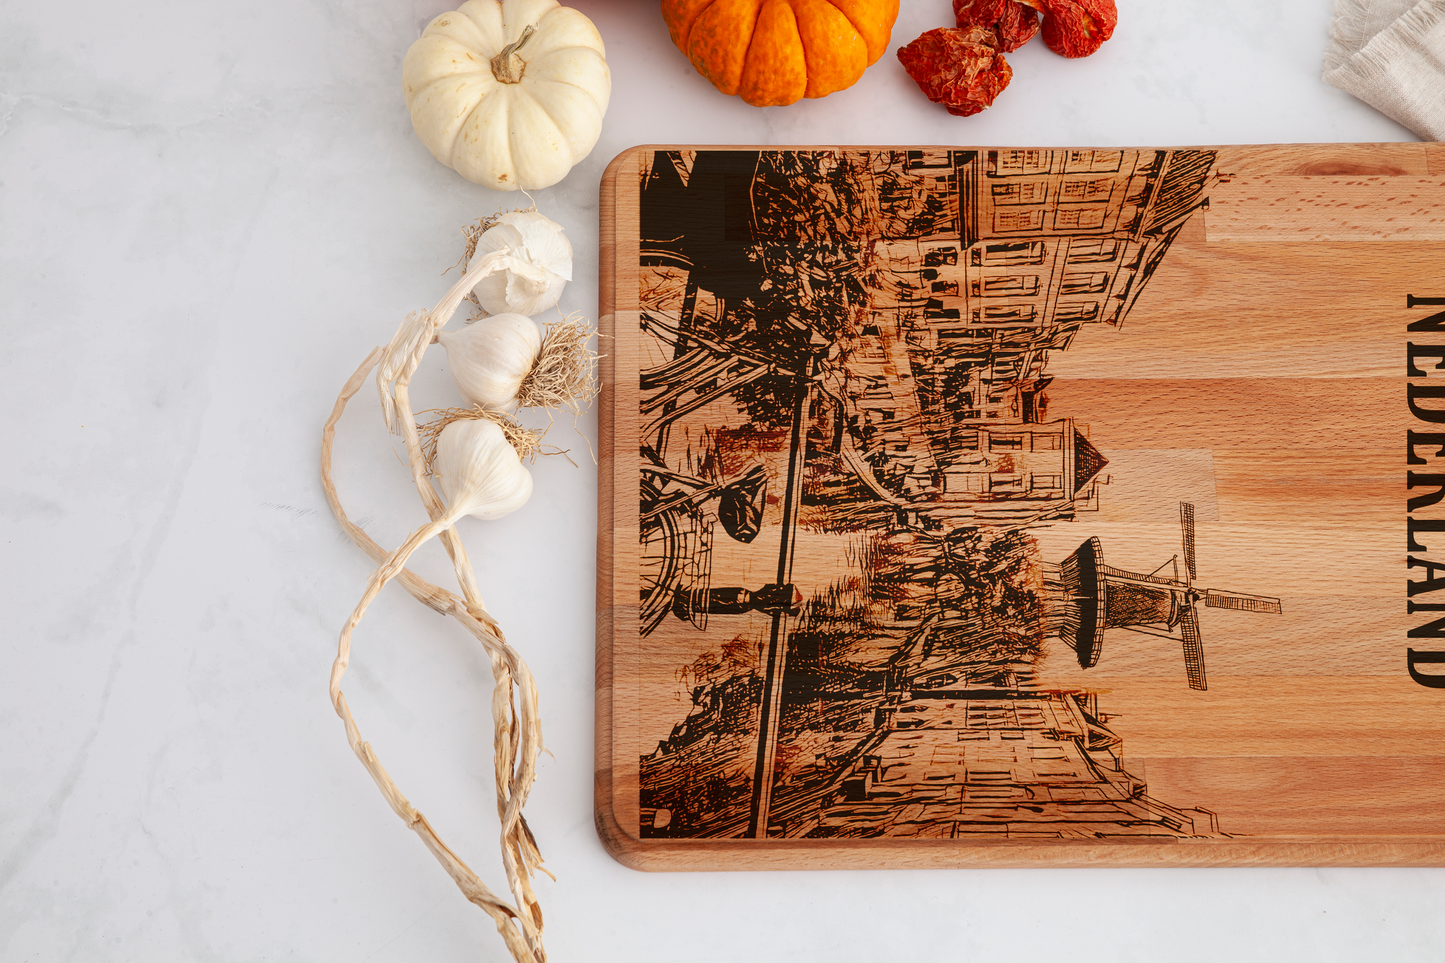 Nederland, City View, cutting board, antimicrobial